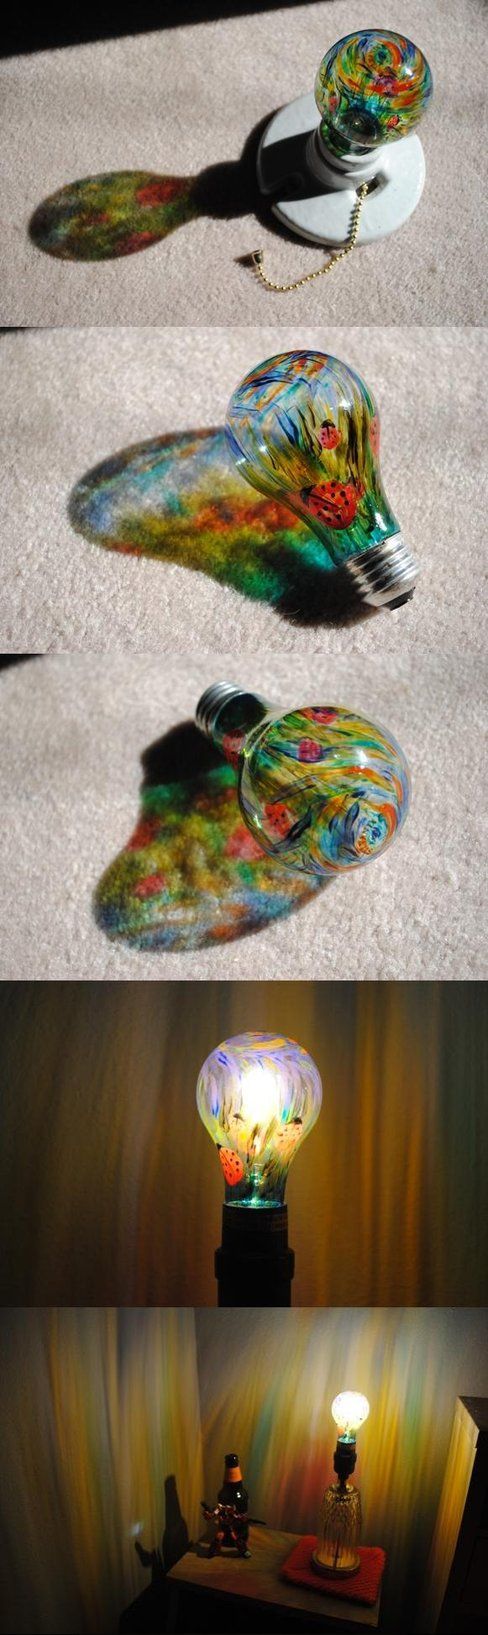 37.PAINT A LIGHT BULB AND SPREAD THE COLORS